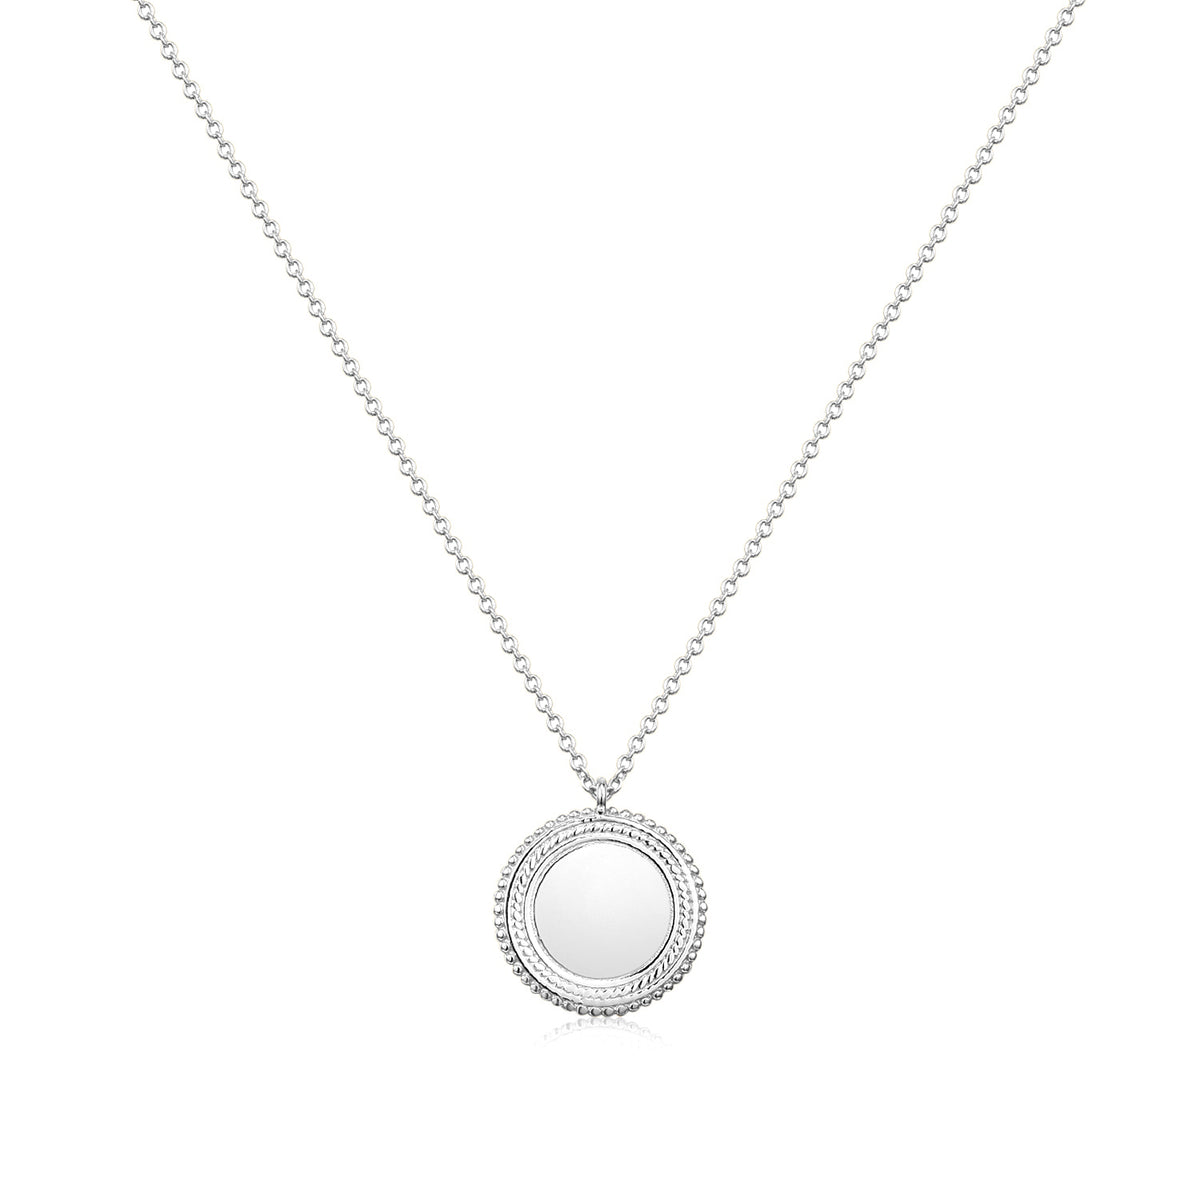 Poena | St. Helens Necklace | White Rhodium Plated 925 Silver